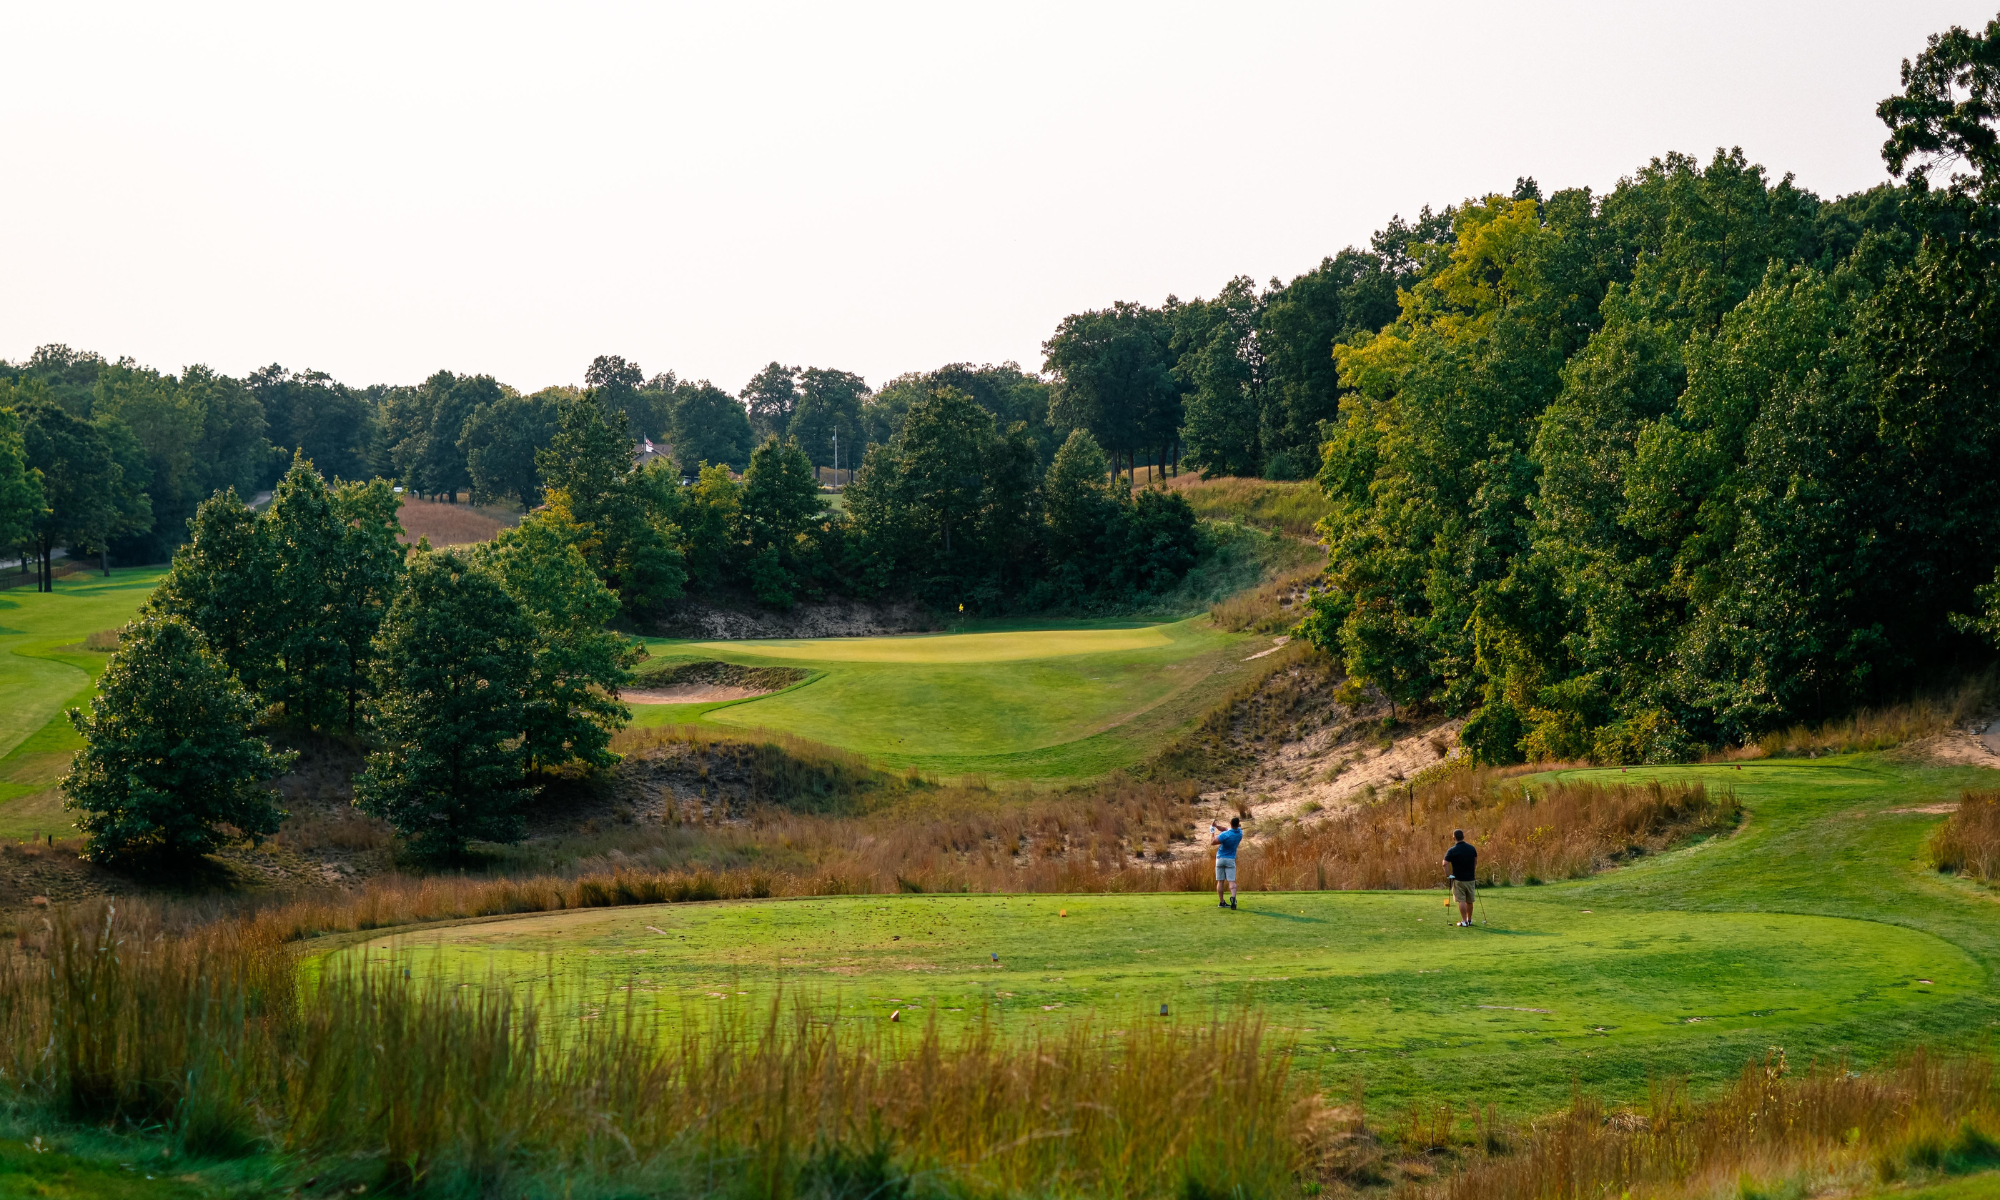 Belvedere Golf Club: One of Michigan's best courses